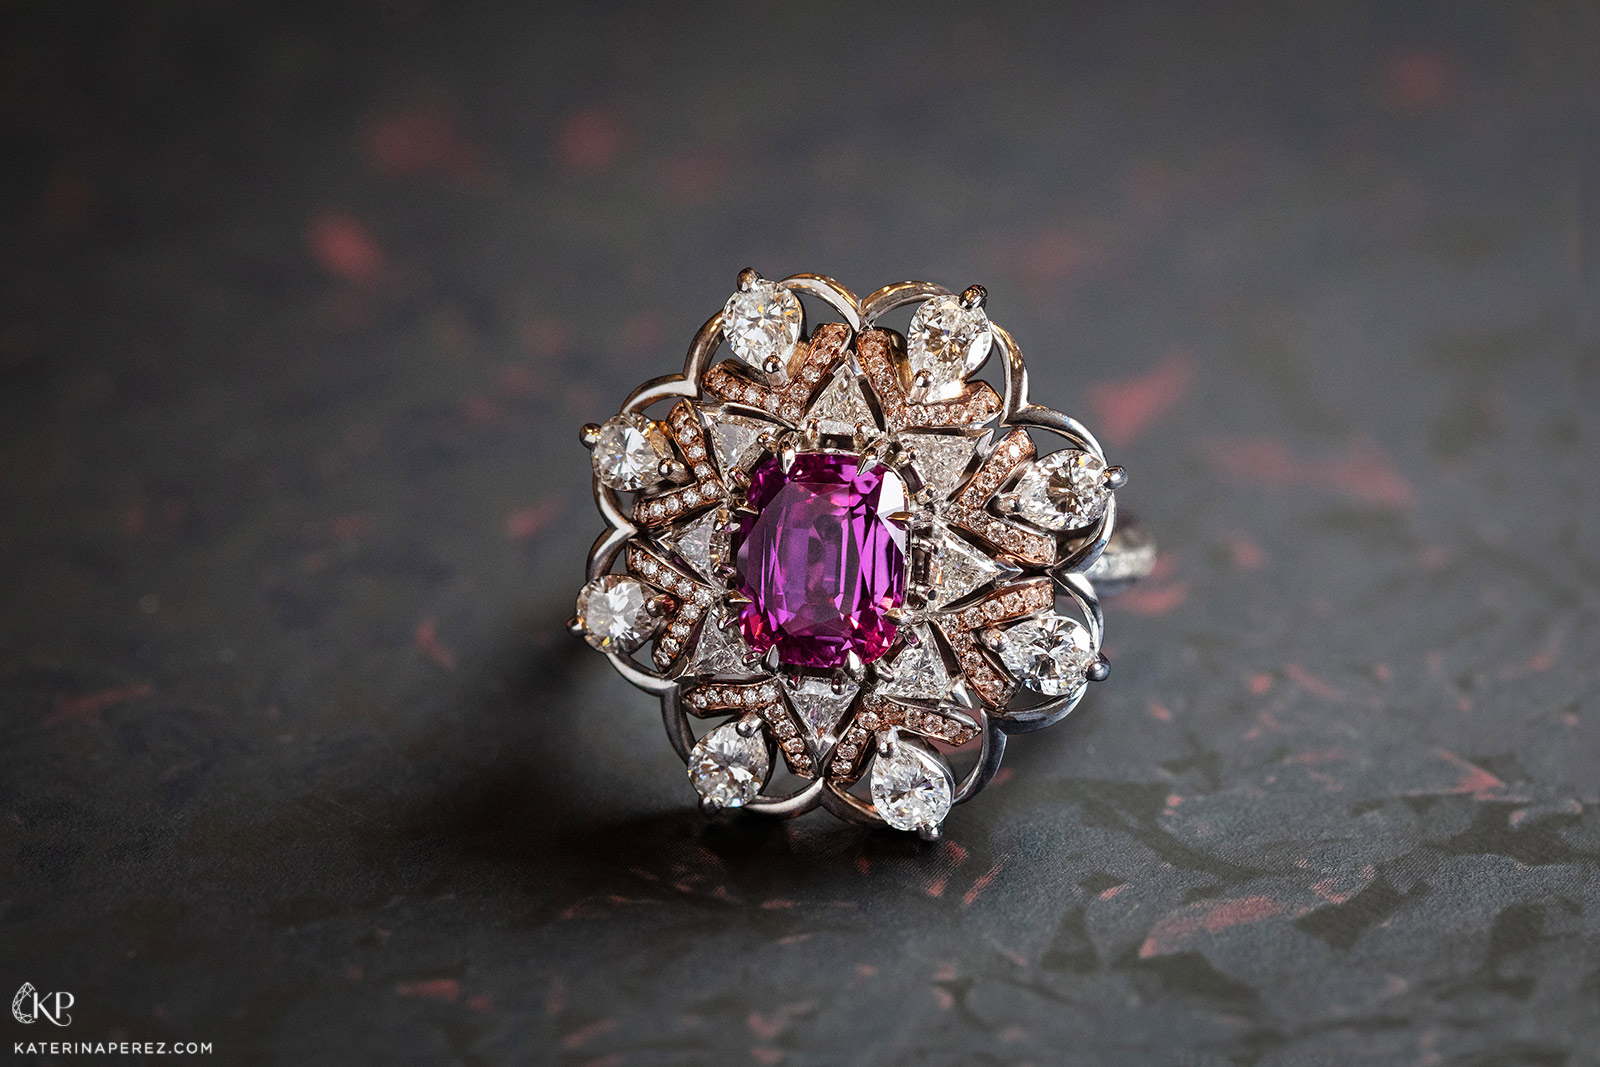 Calleija 'Couture' collection ‘Ciana’ ring with 2.58ct cushion cut pink sapphire and diamonds in yellow and white gold